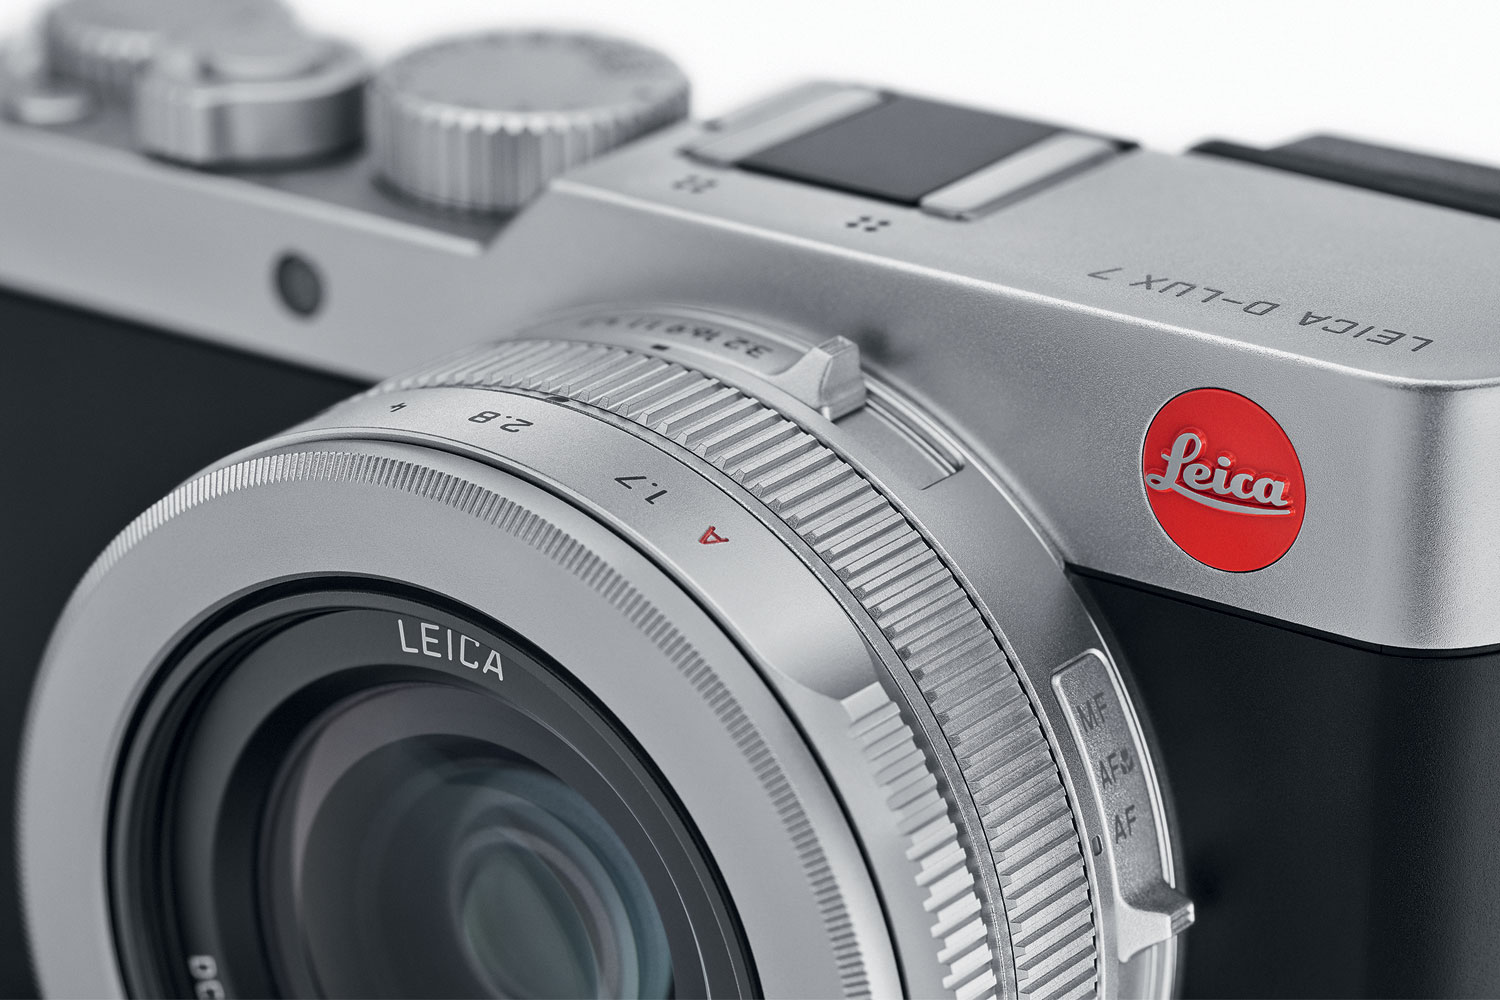 New Leica D-Lux 7 Compact Camera Brings Quality and Luxury 